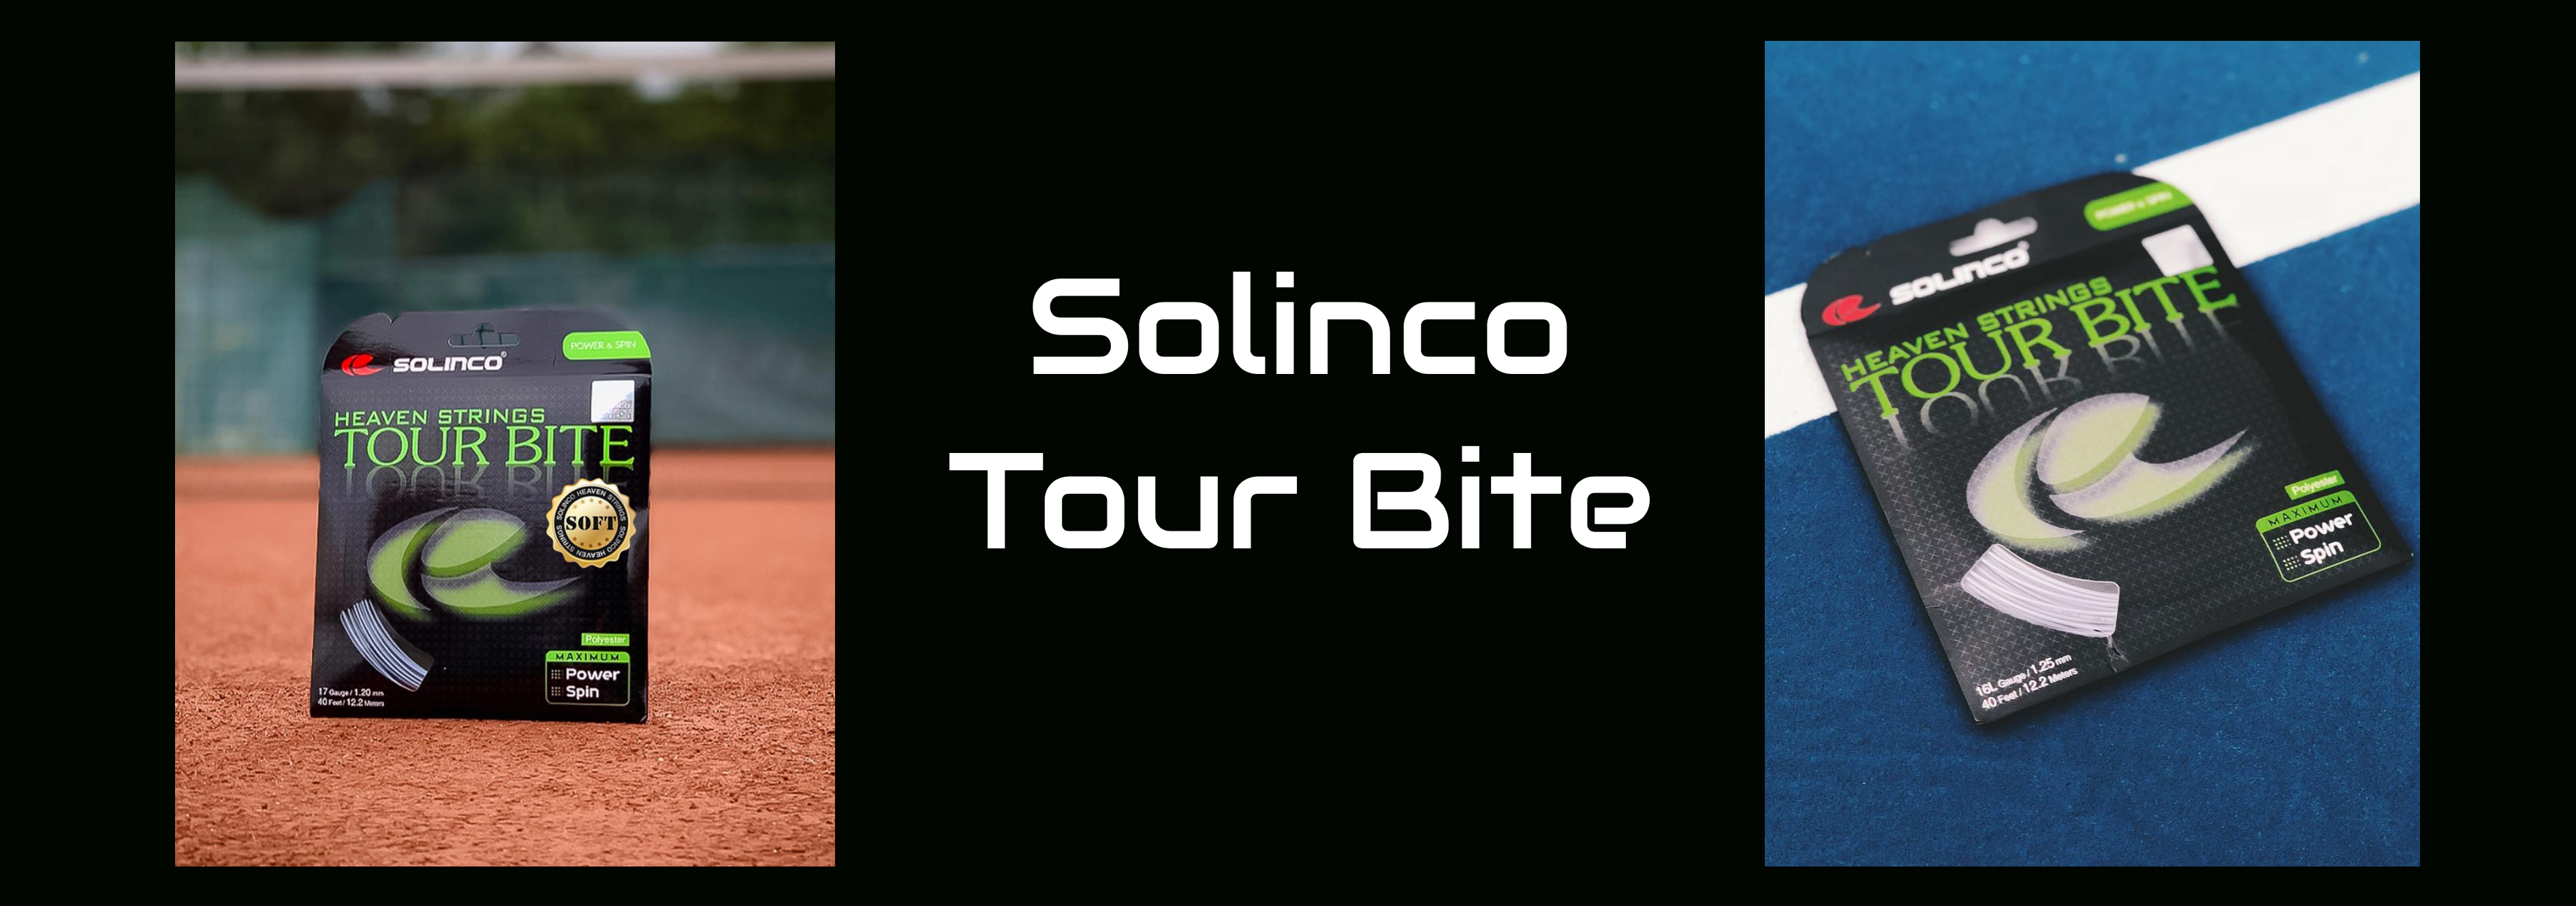 A display of Solinco Tour Bite Strings at Racquet Point